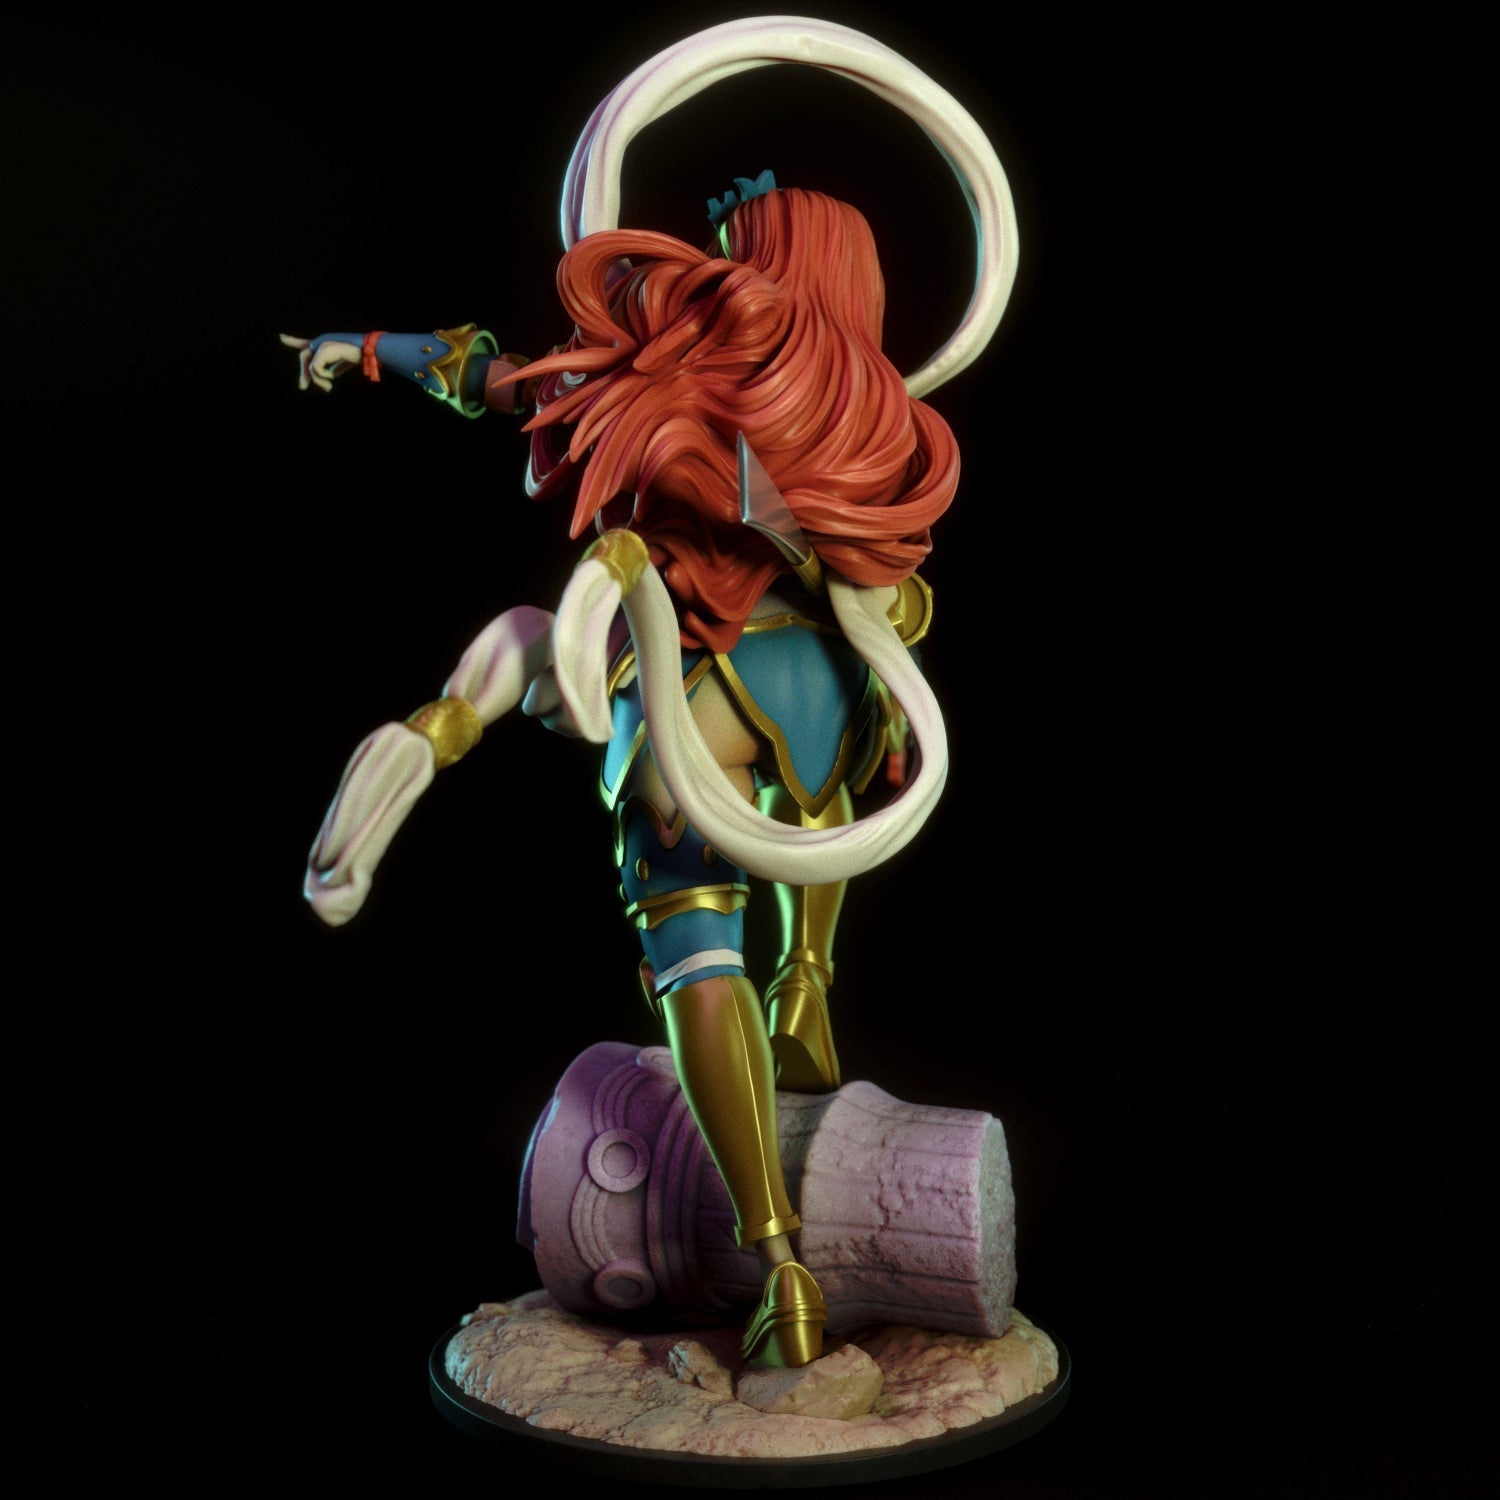 Erza Scarlet anime Pin-up 3d Printed miniature FanArt by Torrida